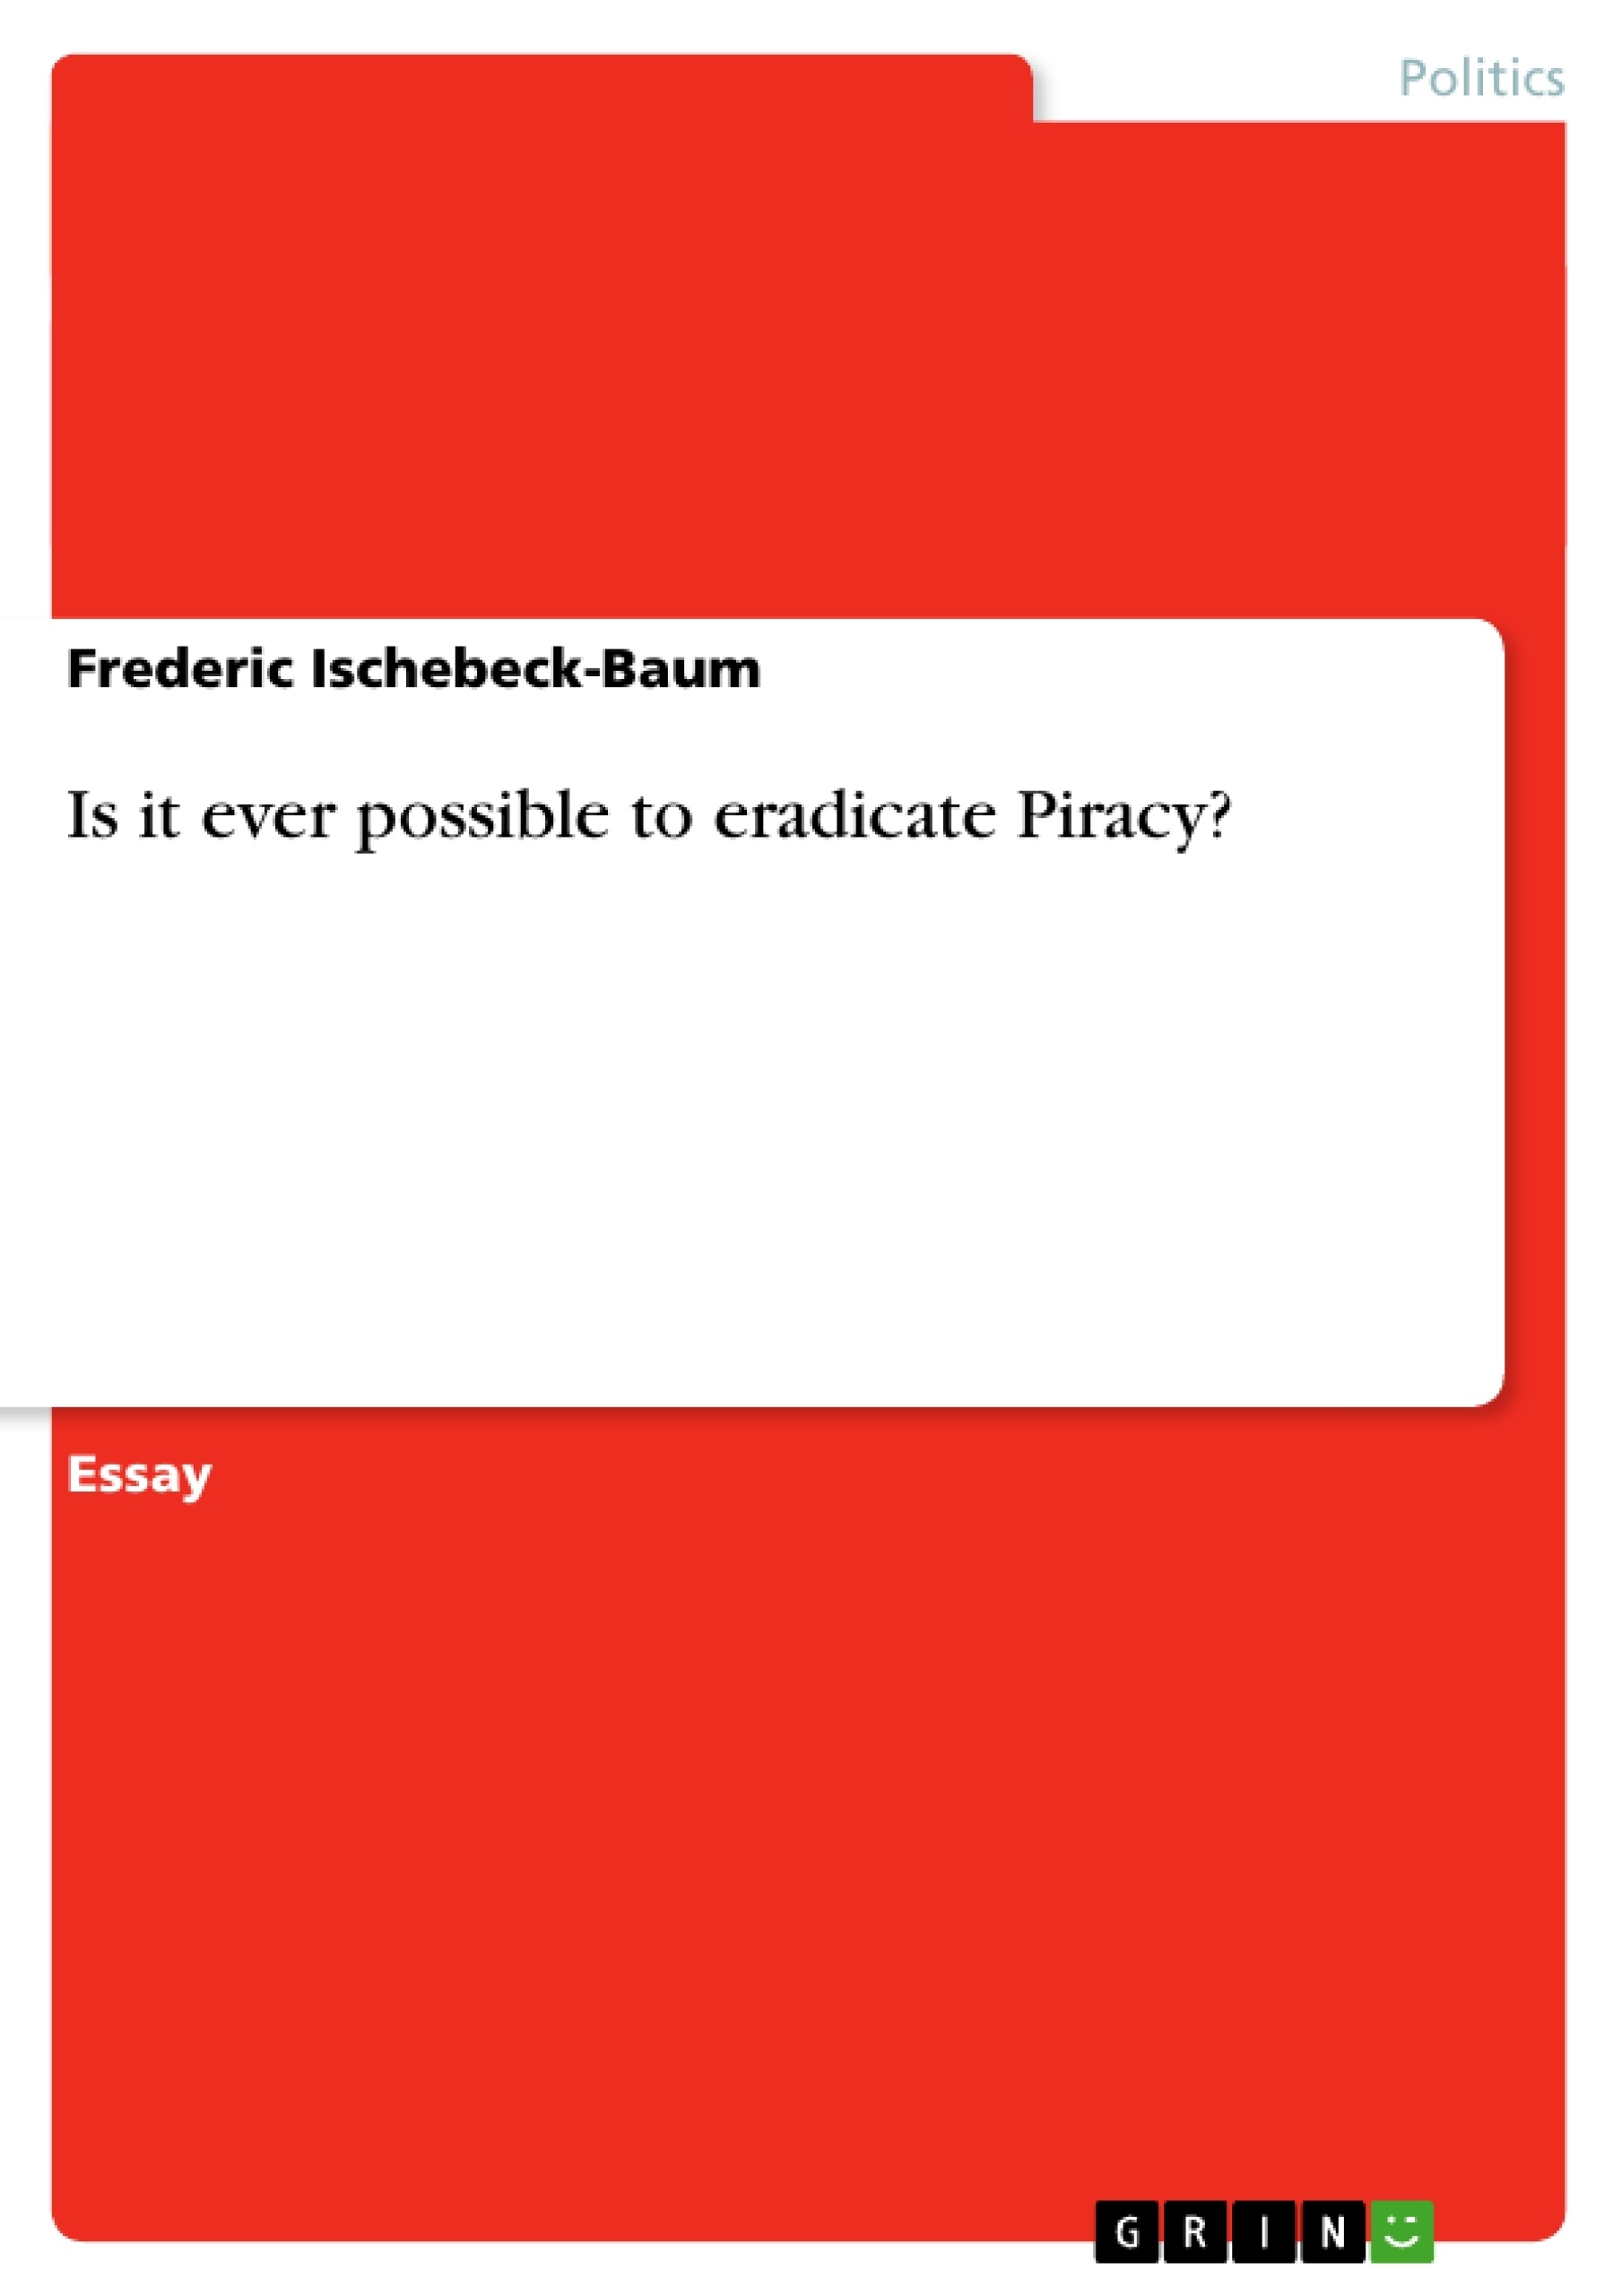 Título: Is it ever possible to eradicate Piracy?